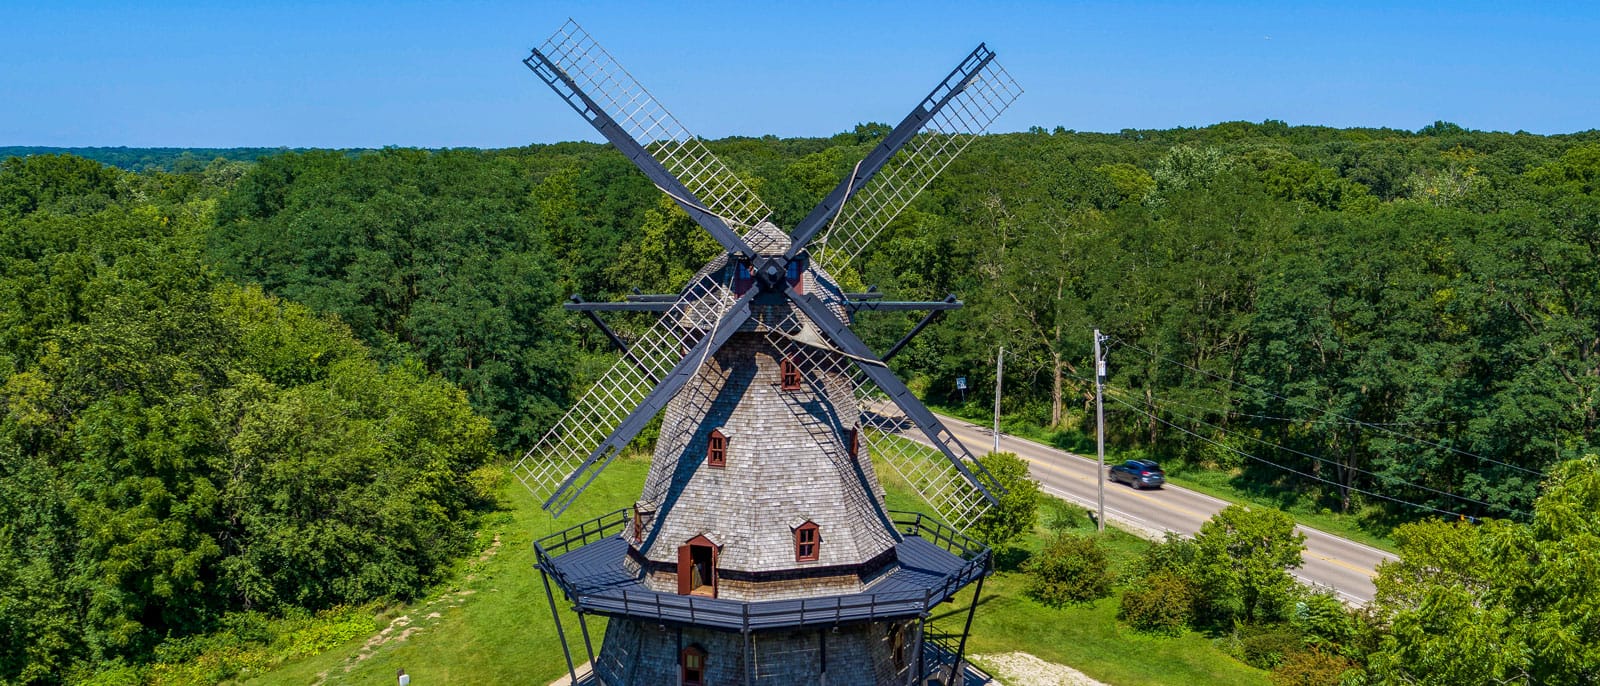 The windmill at the Fabyan Forest Preserve